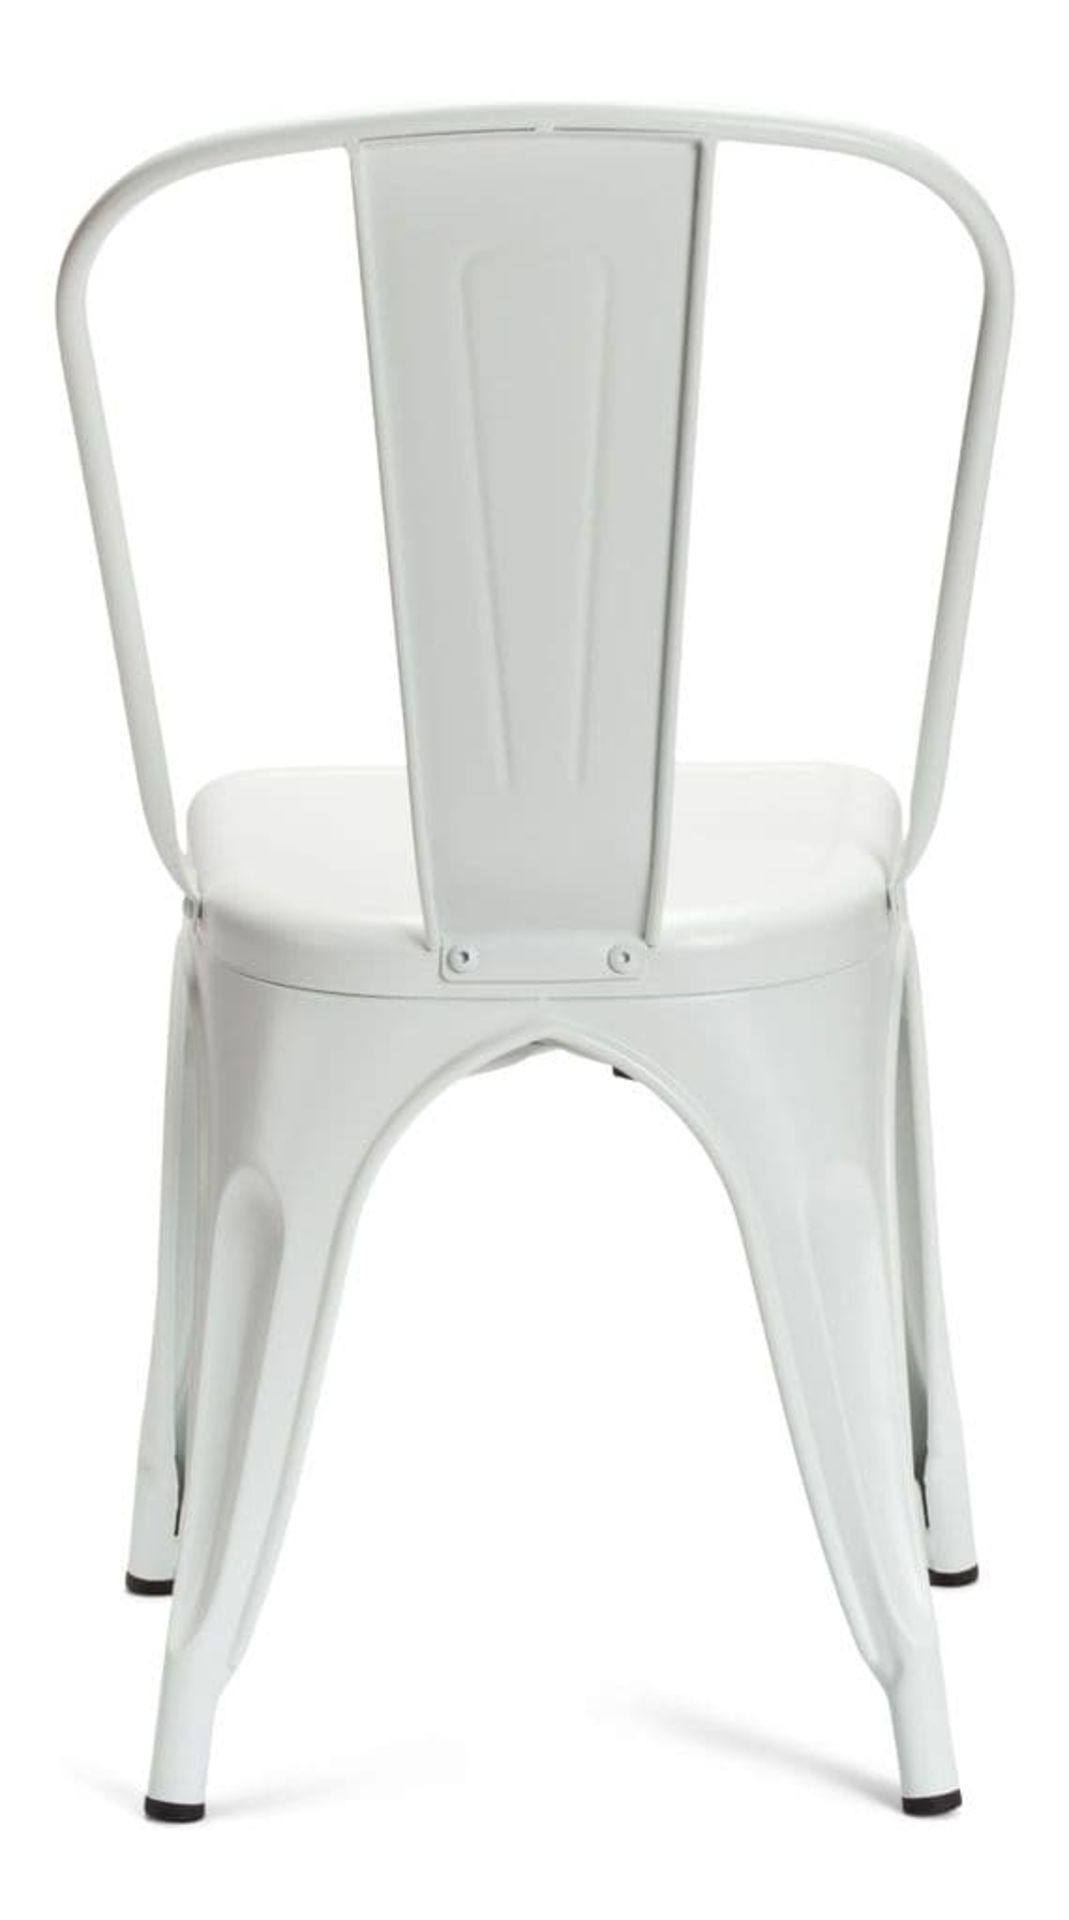 1 x Tolix Industrial Style Outdoor Bistro Table and Chair Set in White- Includes 1 x Table and 4 x - Image 8 of 13